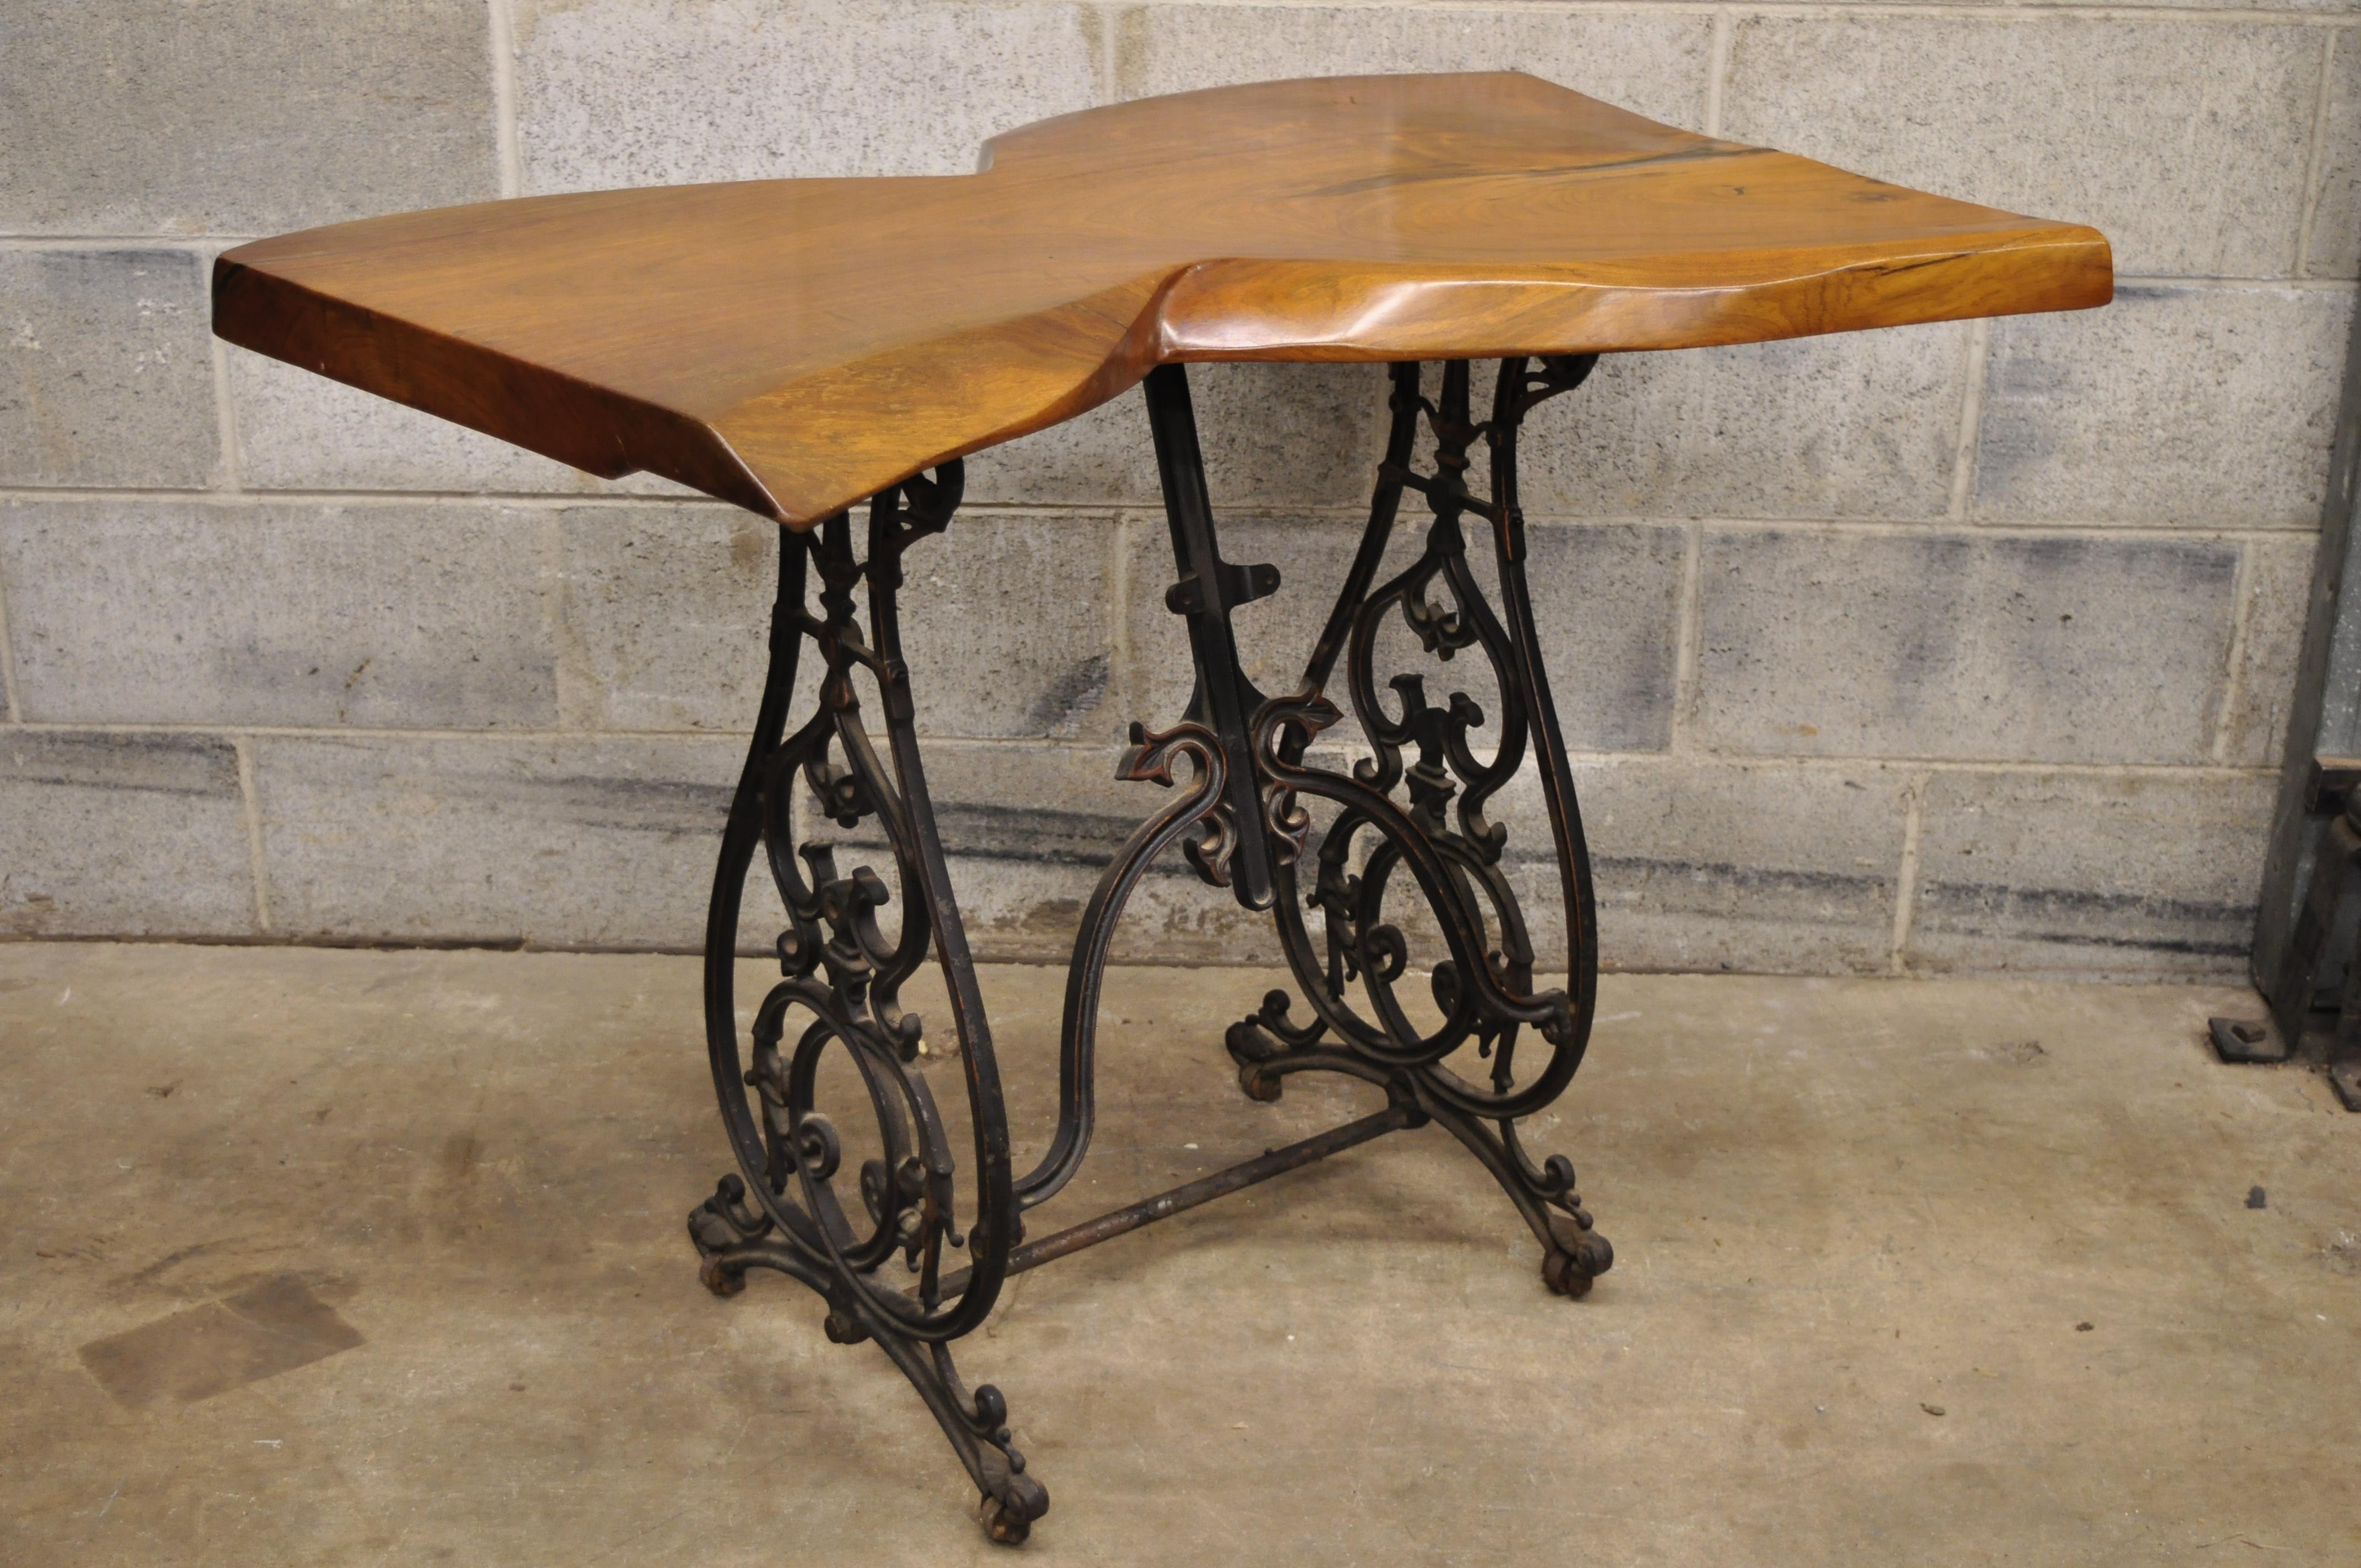 20th Century William Herrick Cast Iron Sewing Machine Base Desk Console Table Live Edge Top For Sale